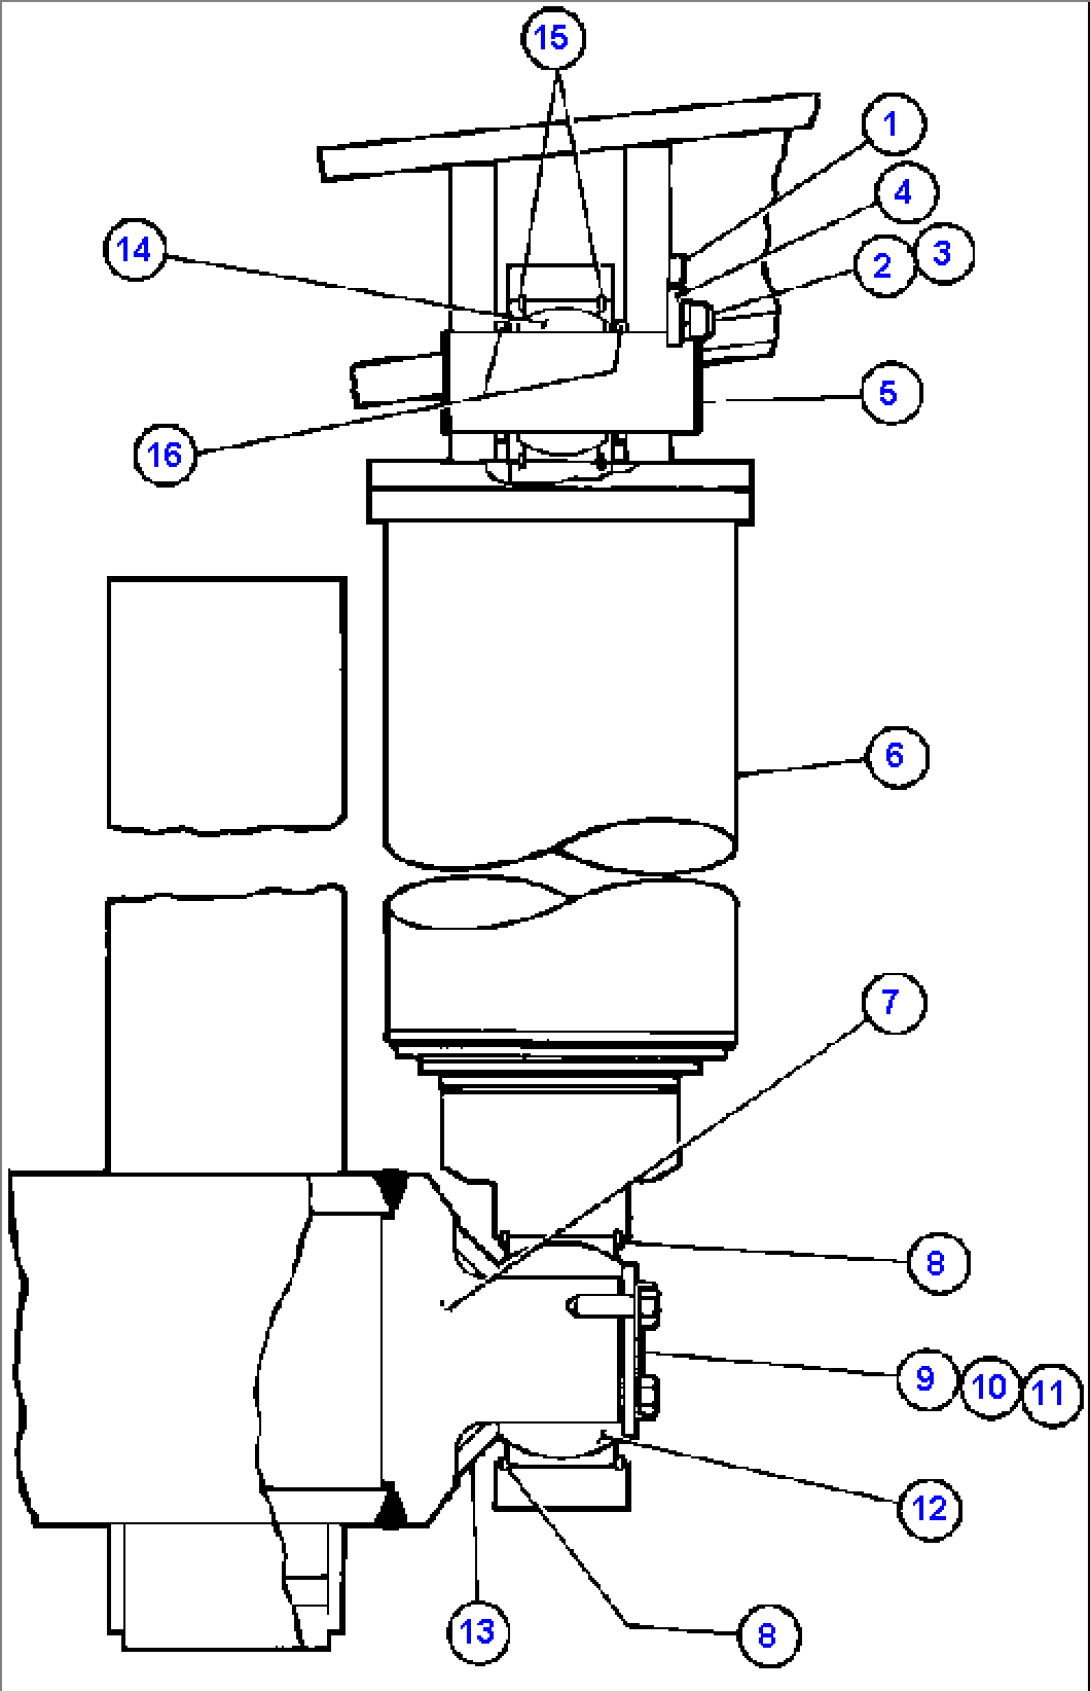 HOIST SYSTEM PIPING - 1